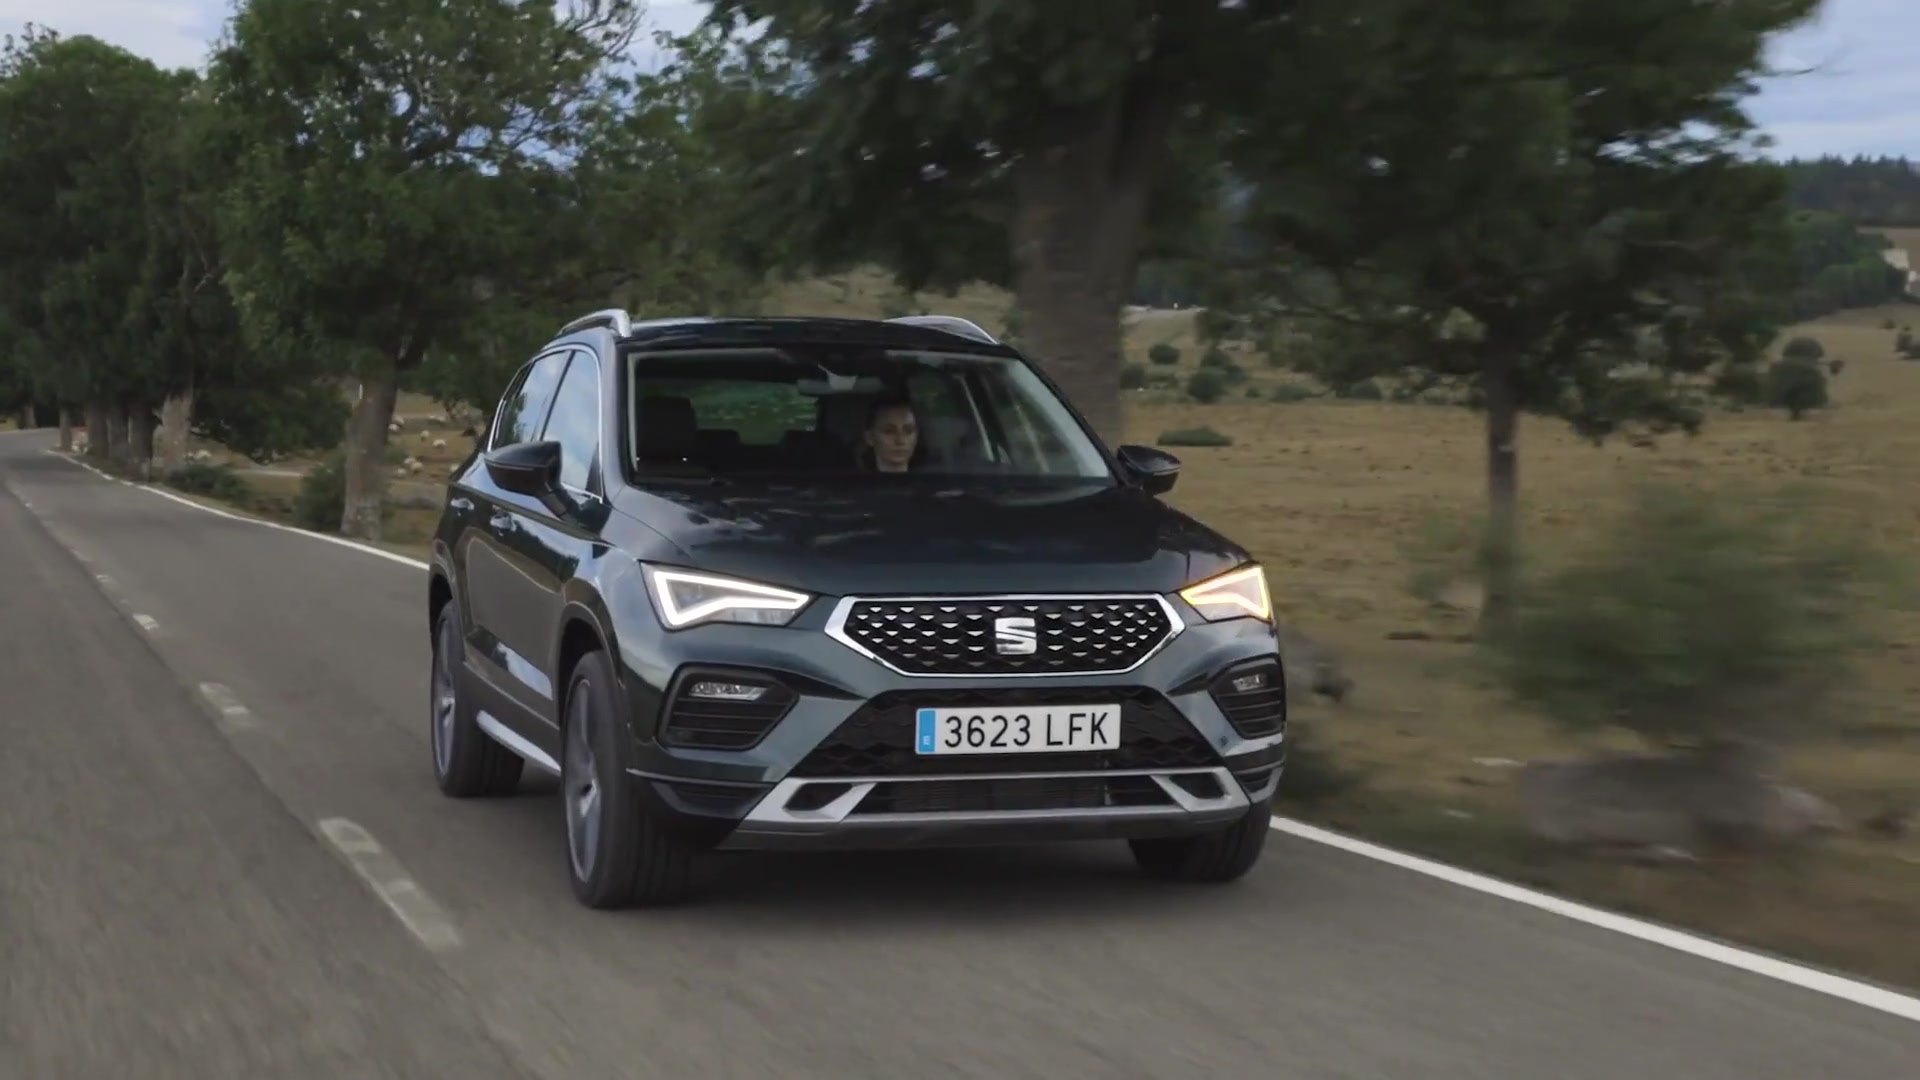 SEAT Ateca Xperience in Dark Camouflage Driving Video - video Dailymotion